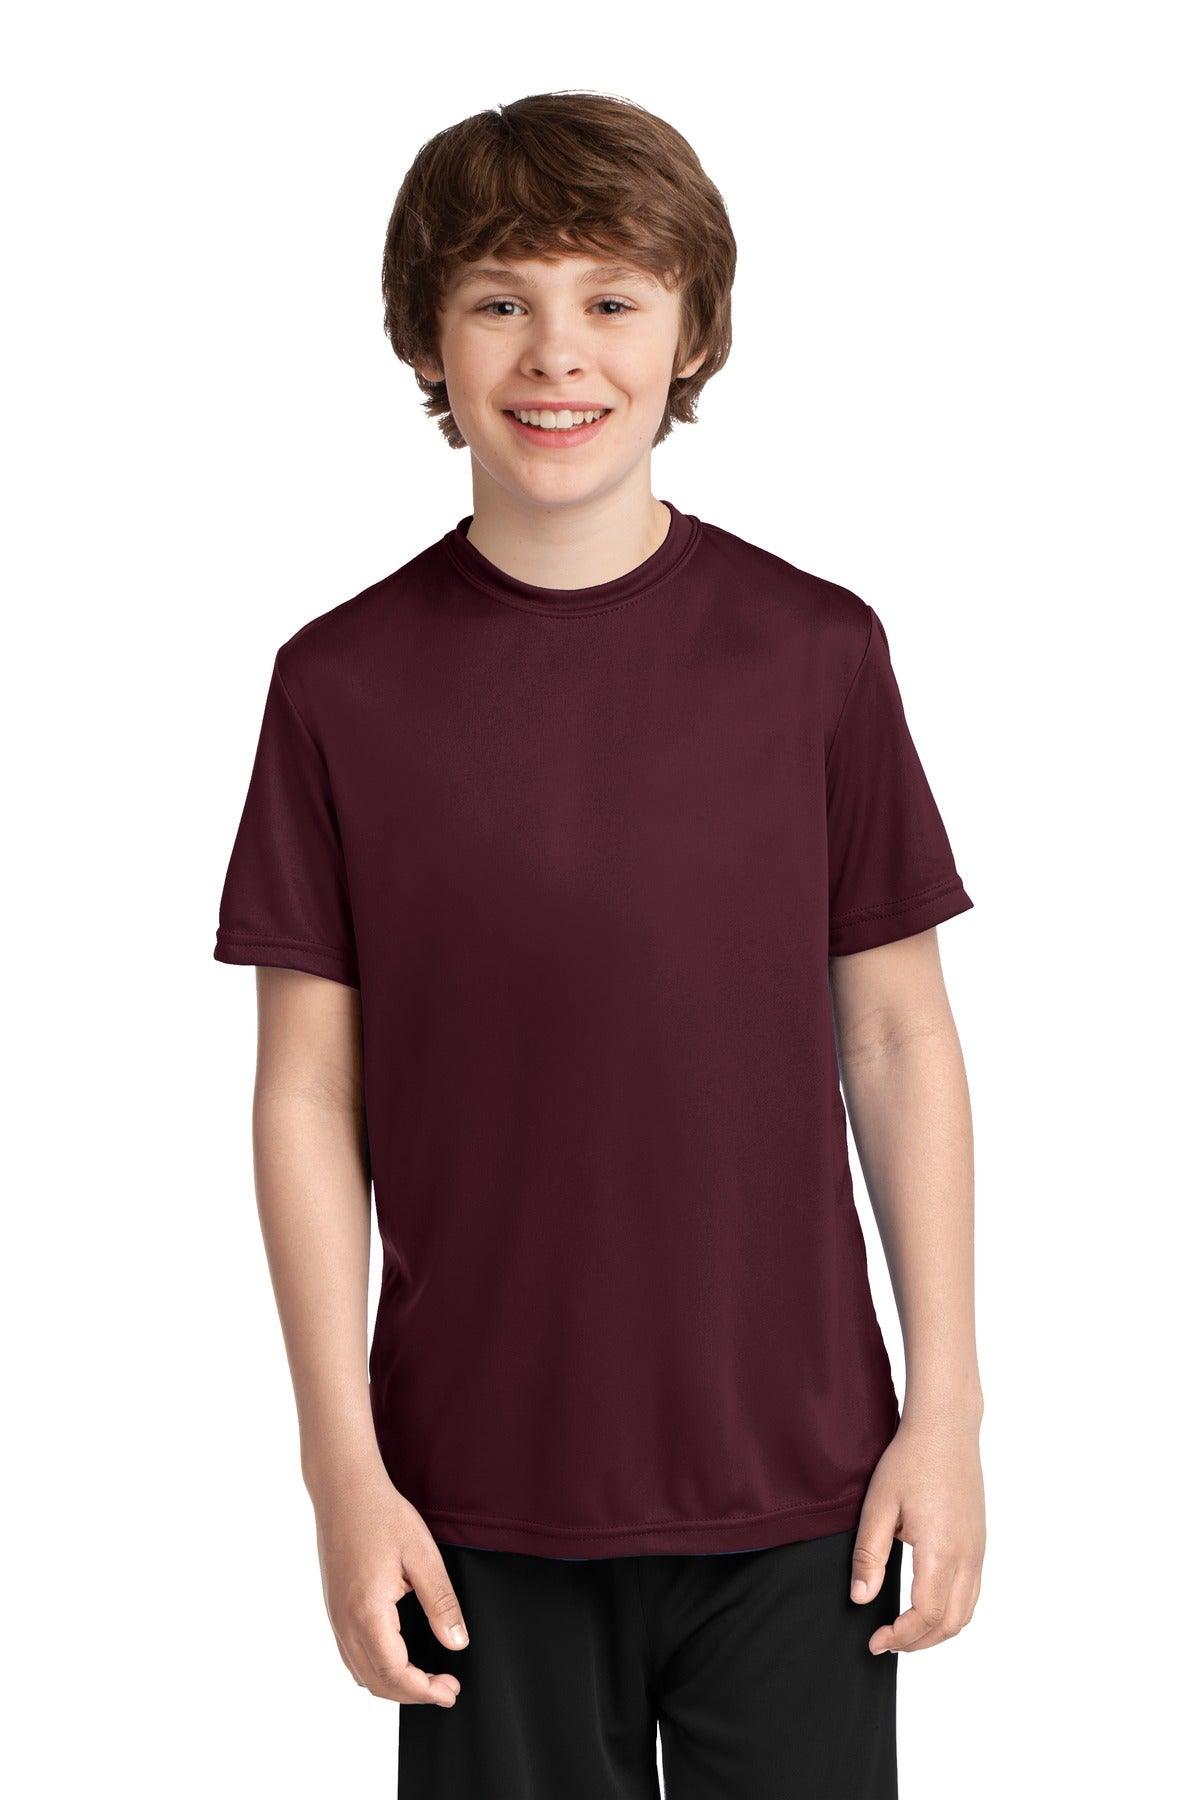 Port & Company Youth Performance Tee. PC380Y - Dresses Max